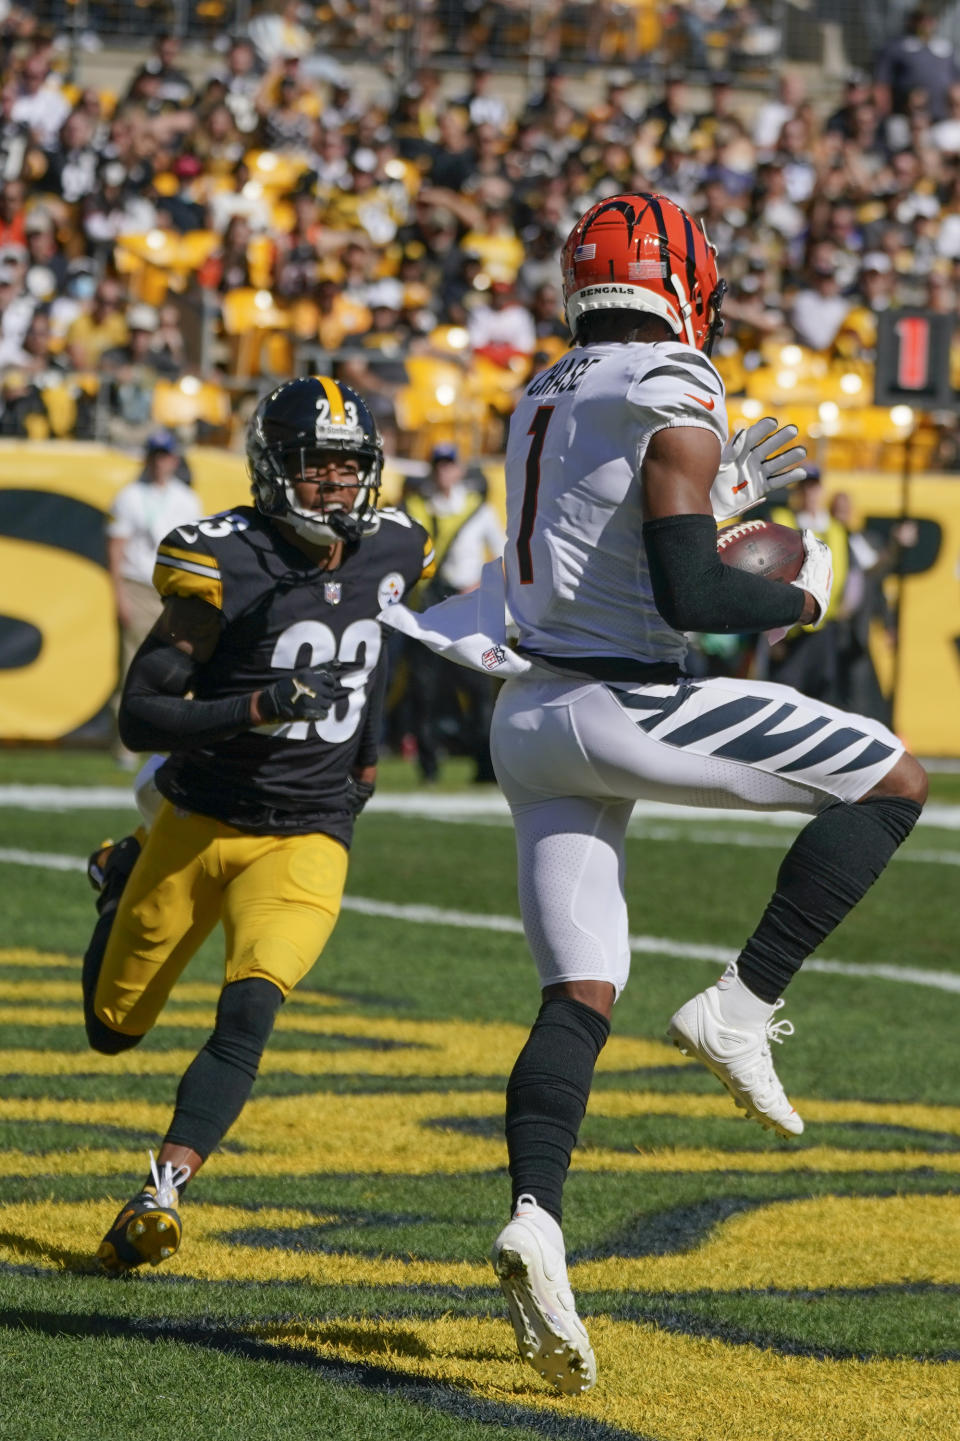 Cincinnati Bengals wide receiver Ja'Marr Chase (1) catches a touchdown pass in front of Pittsburgh Steelers cornerback Joe Haden (23) during the second half an NFL football game, Sunday, Sept. 26, 2021, in Pittsburgh. (AP Photo/Gene J. Puskar)